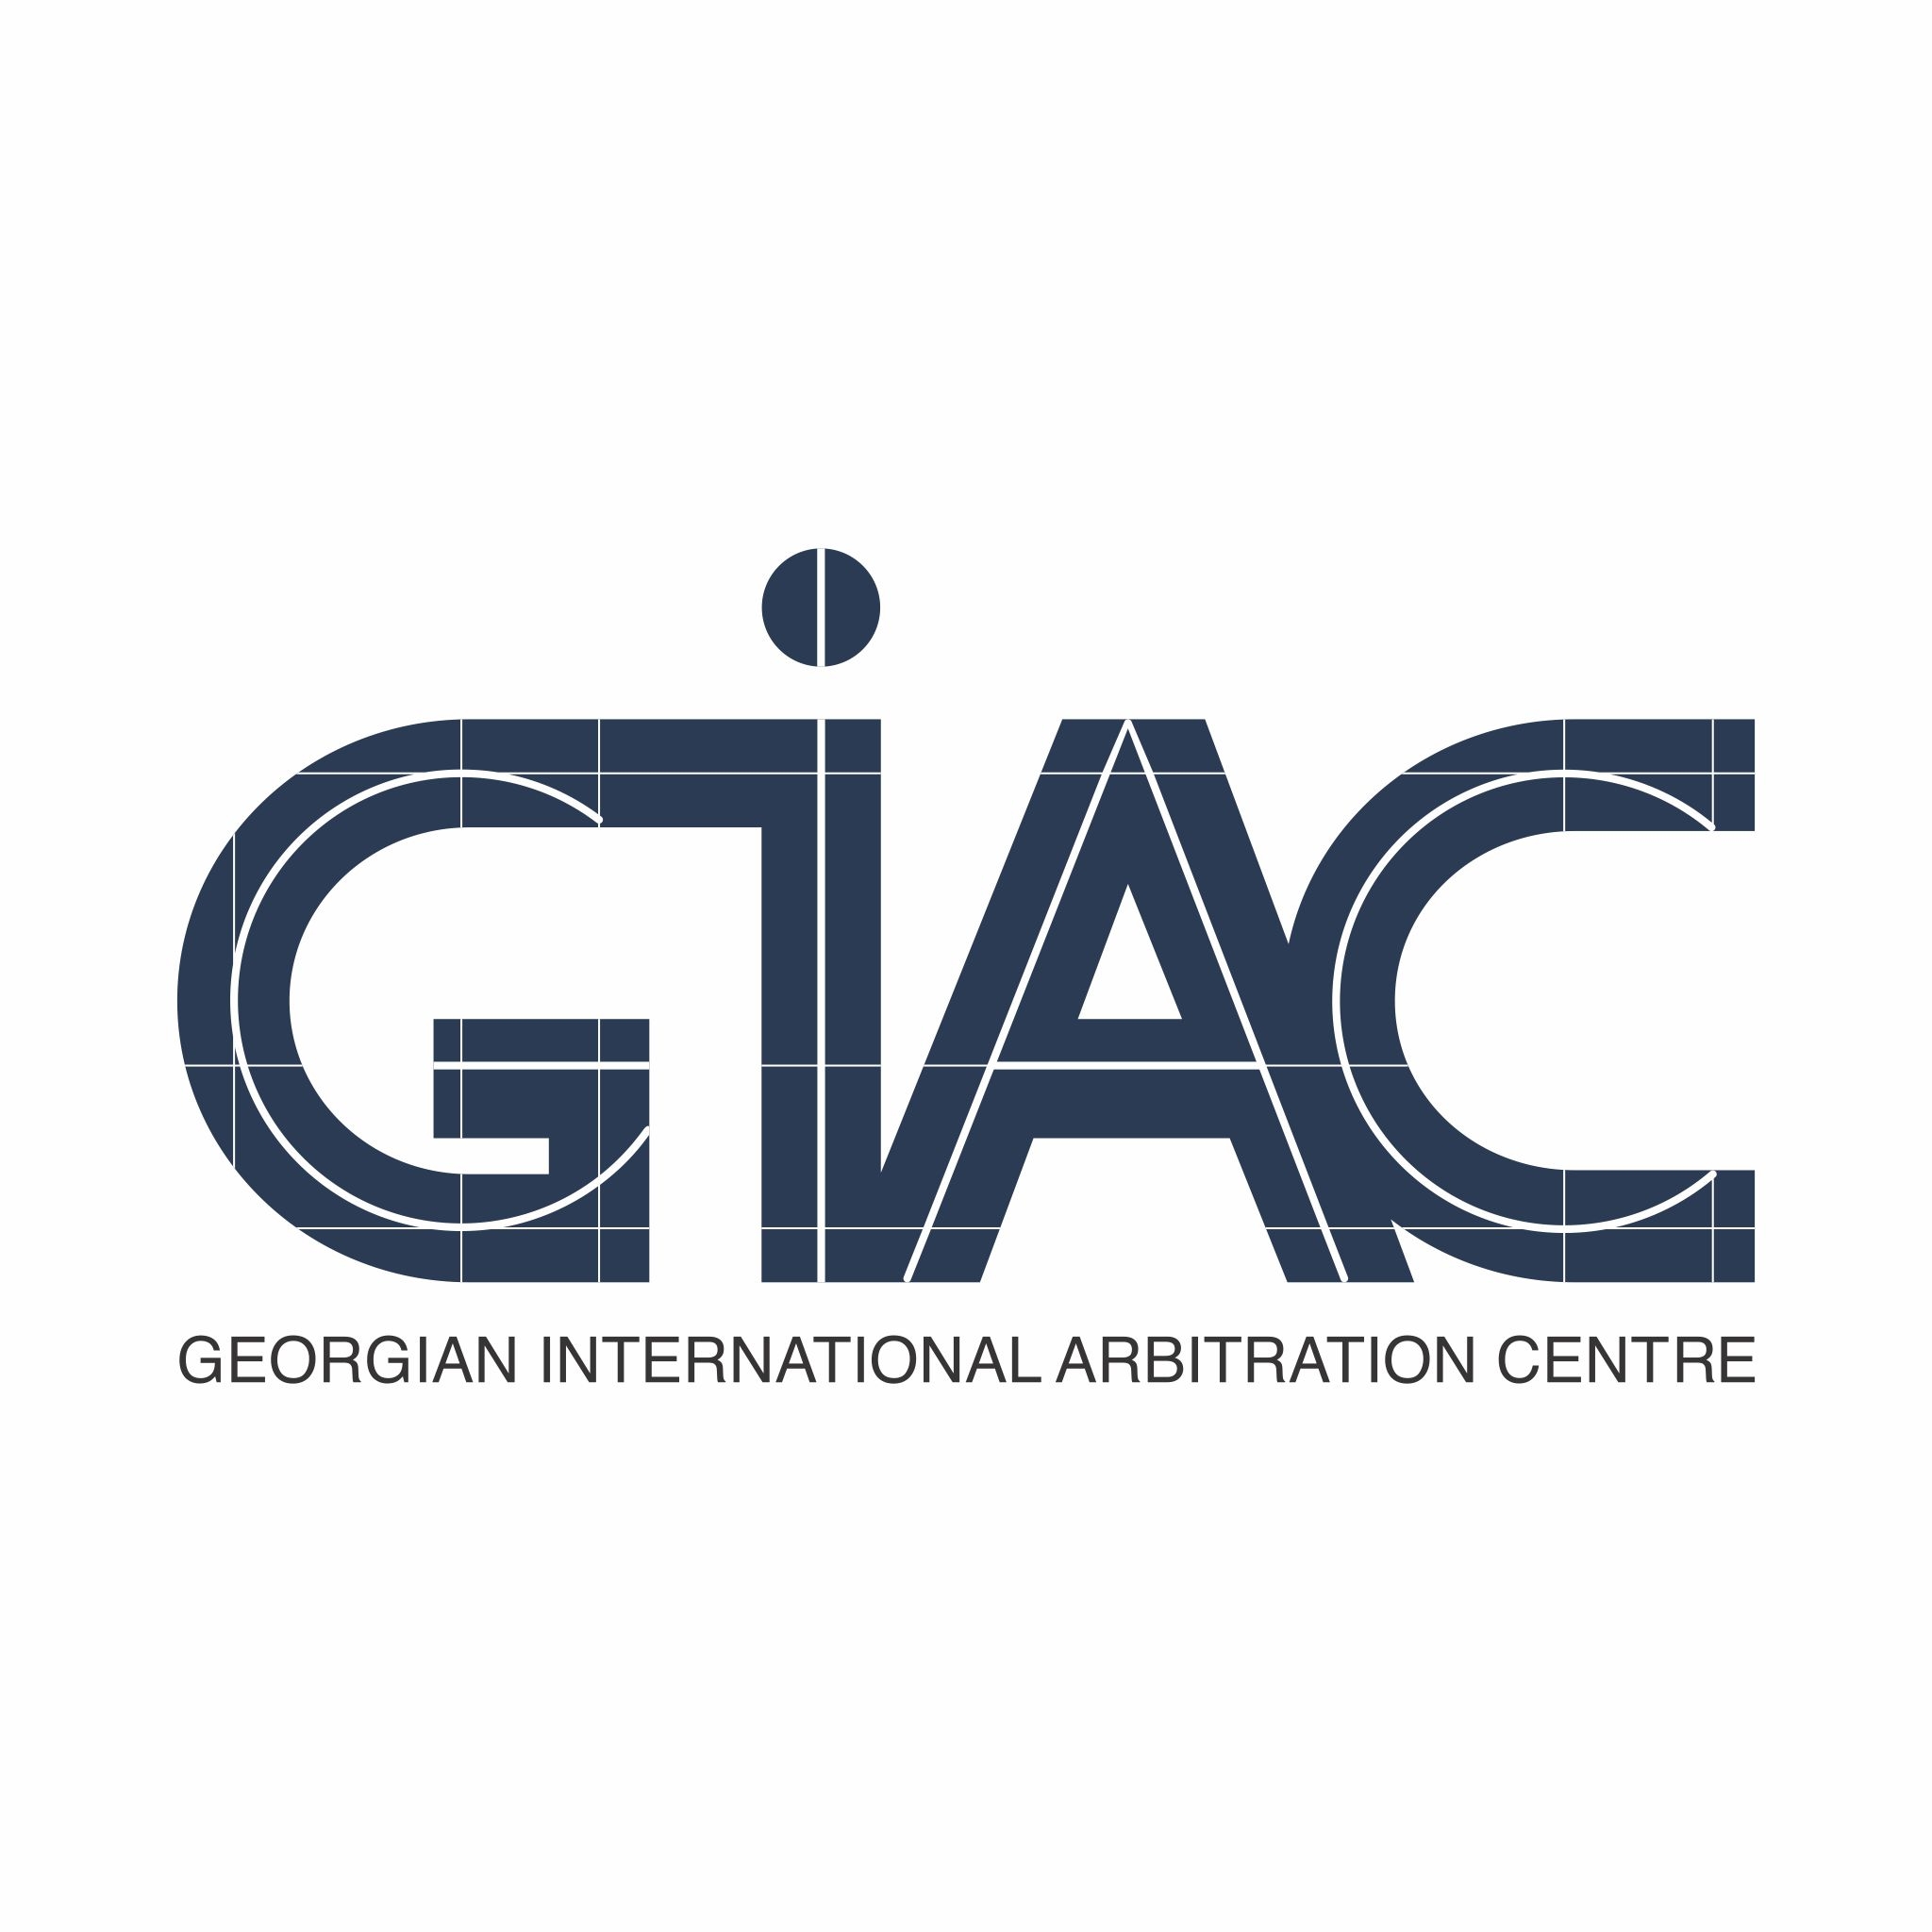 NEW MEMBERS OF THE GIAC ARBITRATION COUNCIL